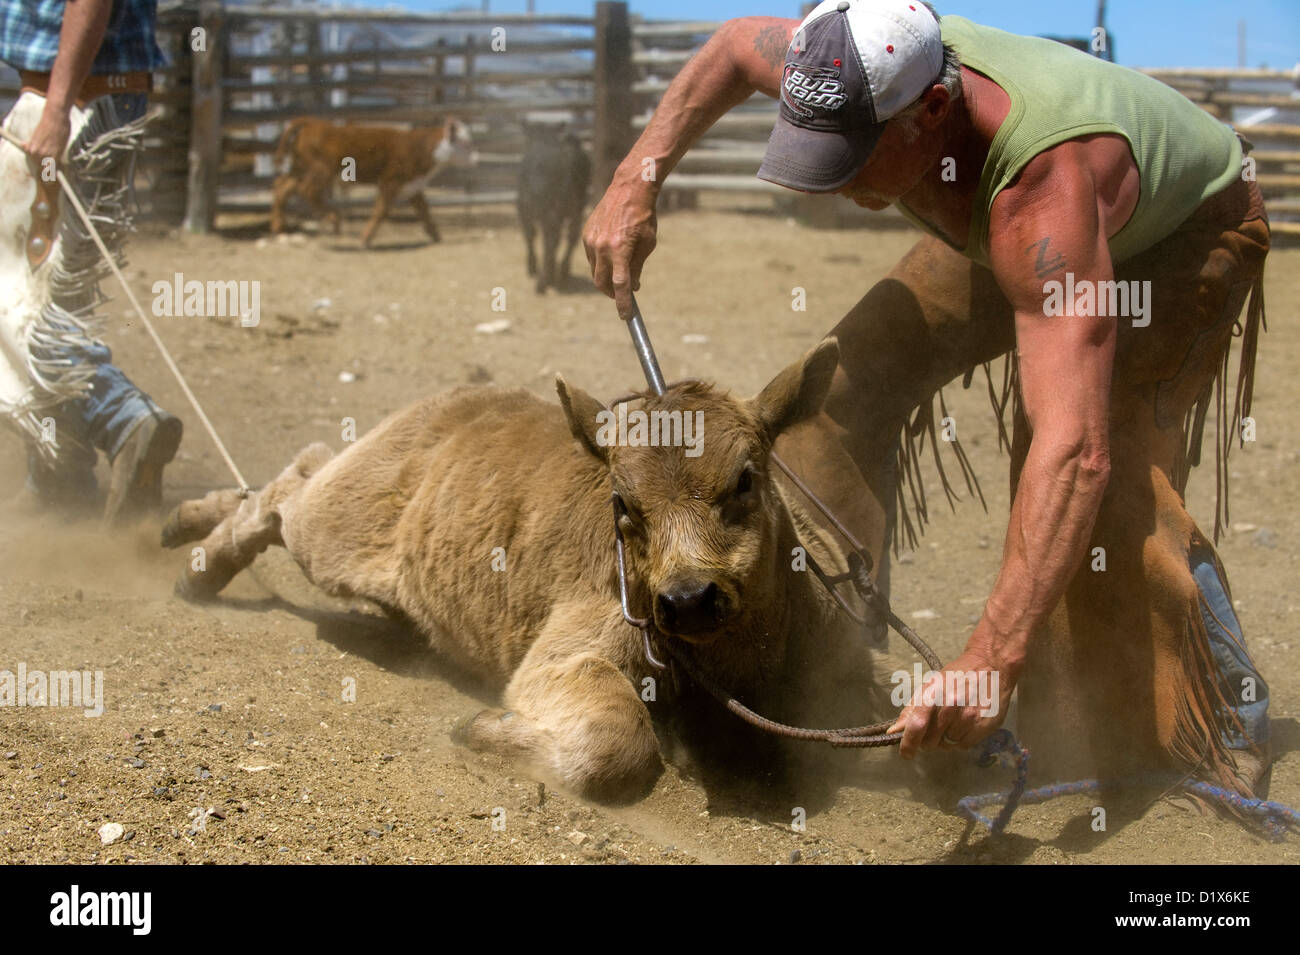 A calf is roped and captured during a branding at the Dalton Ranch in the Clover Valley, NV Stock Photo